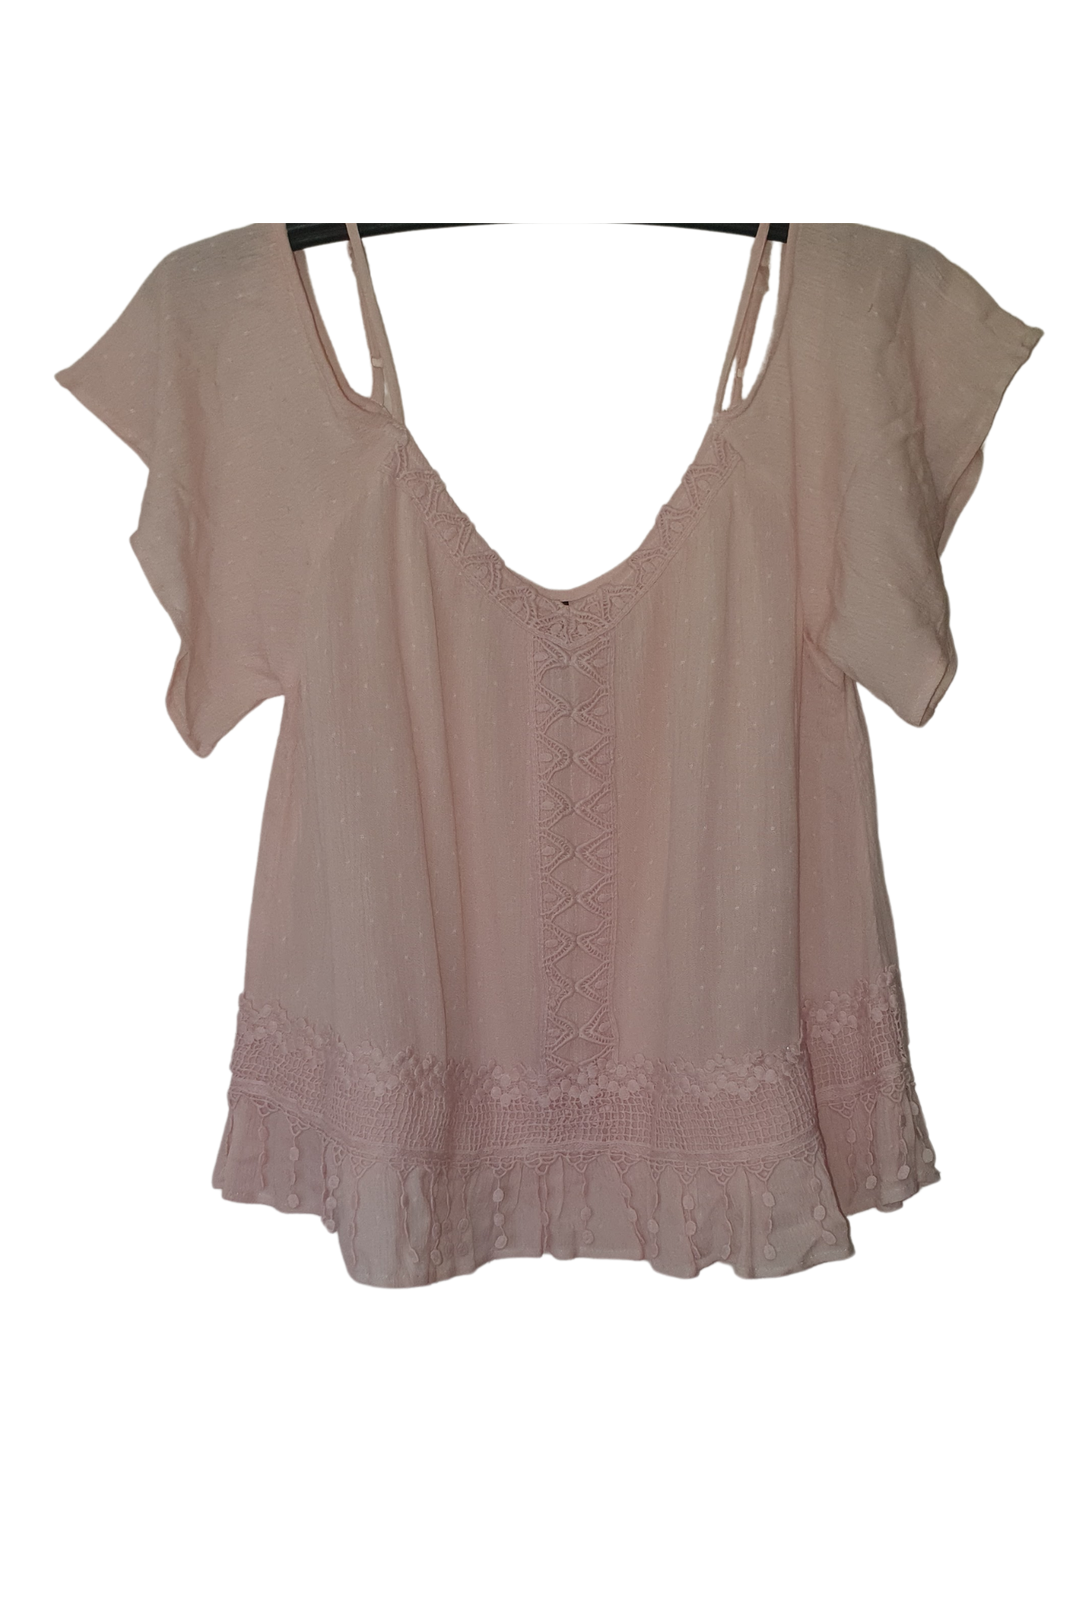 PINK SOFT WITH LACE DETAIL TOP